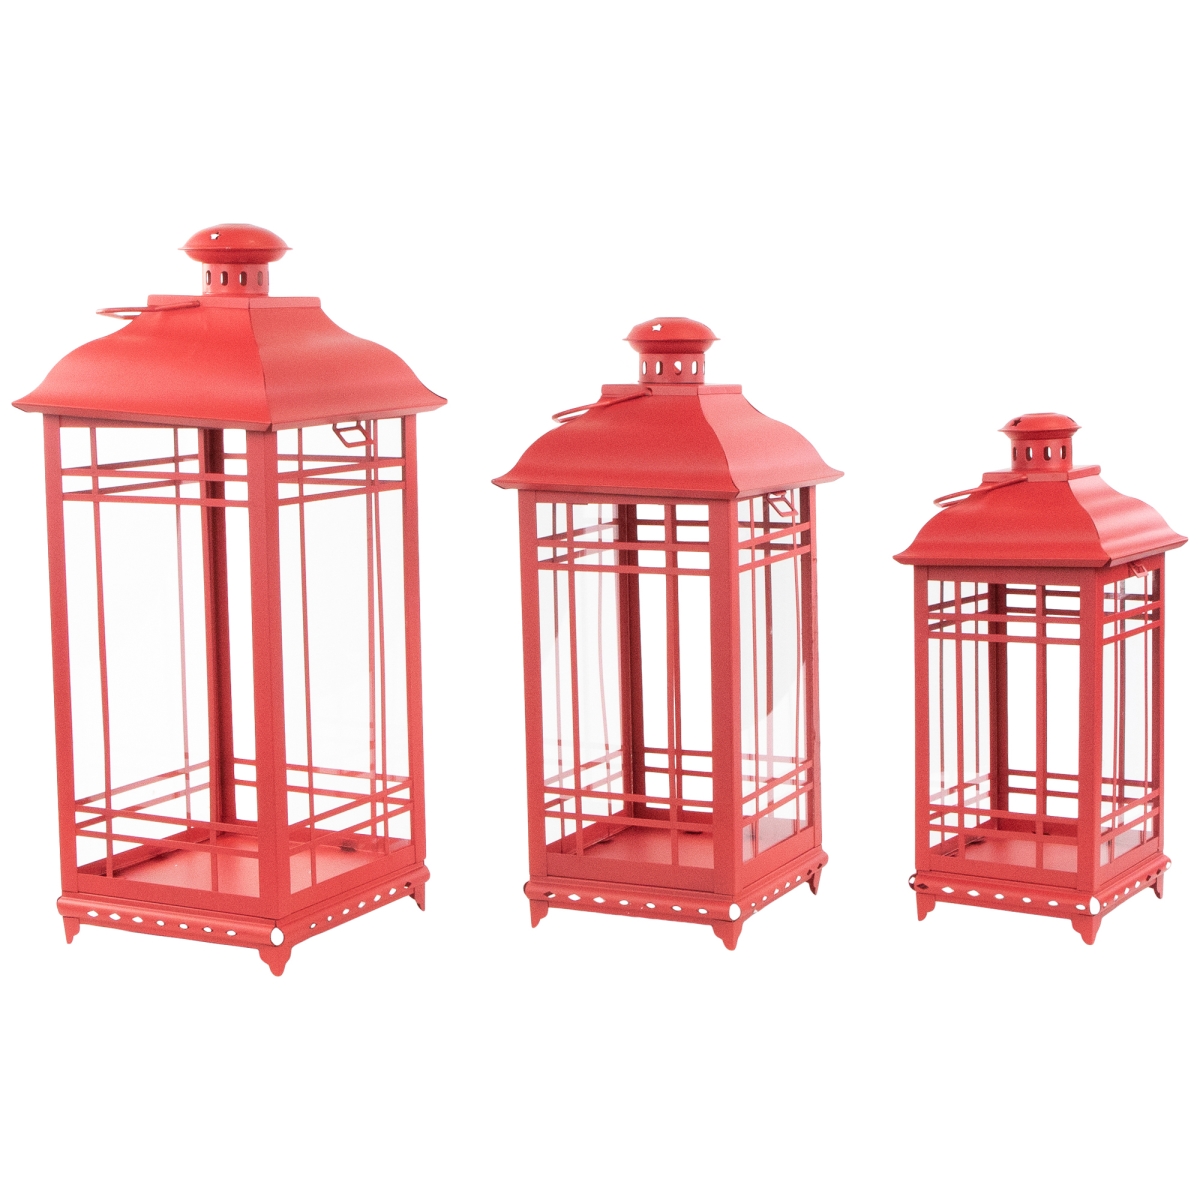 Picture of Northlight 35132870 19.5 in. Mission Style Candle Lanterns, Red - Set of 3